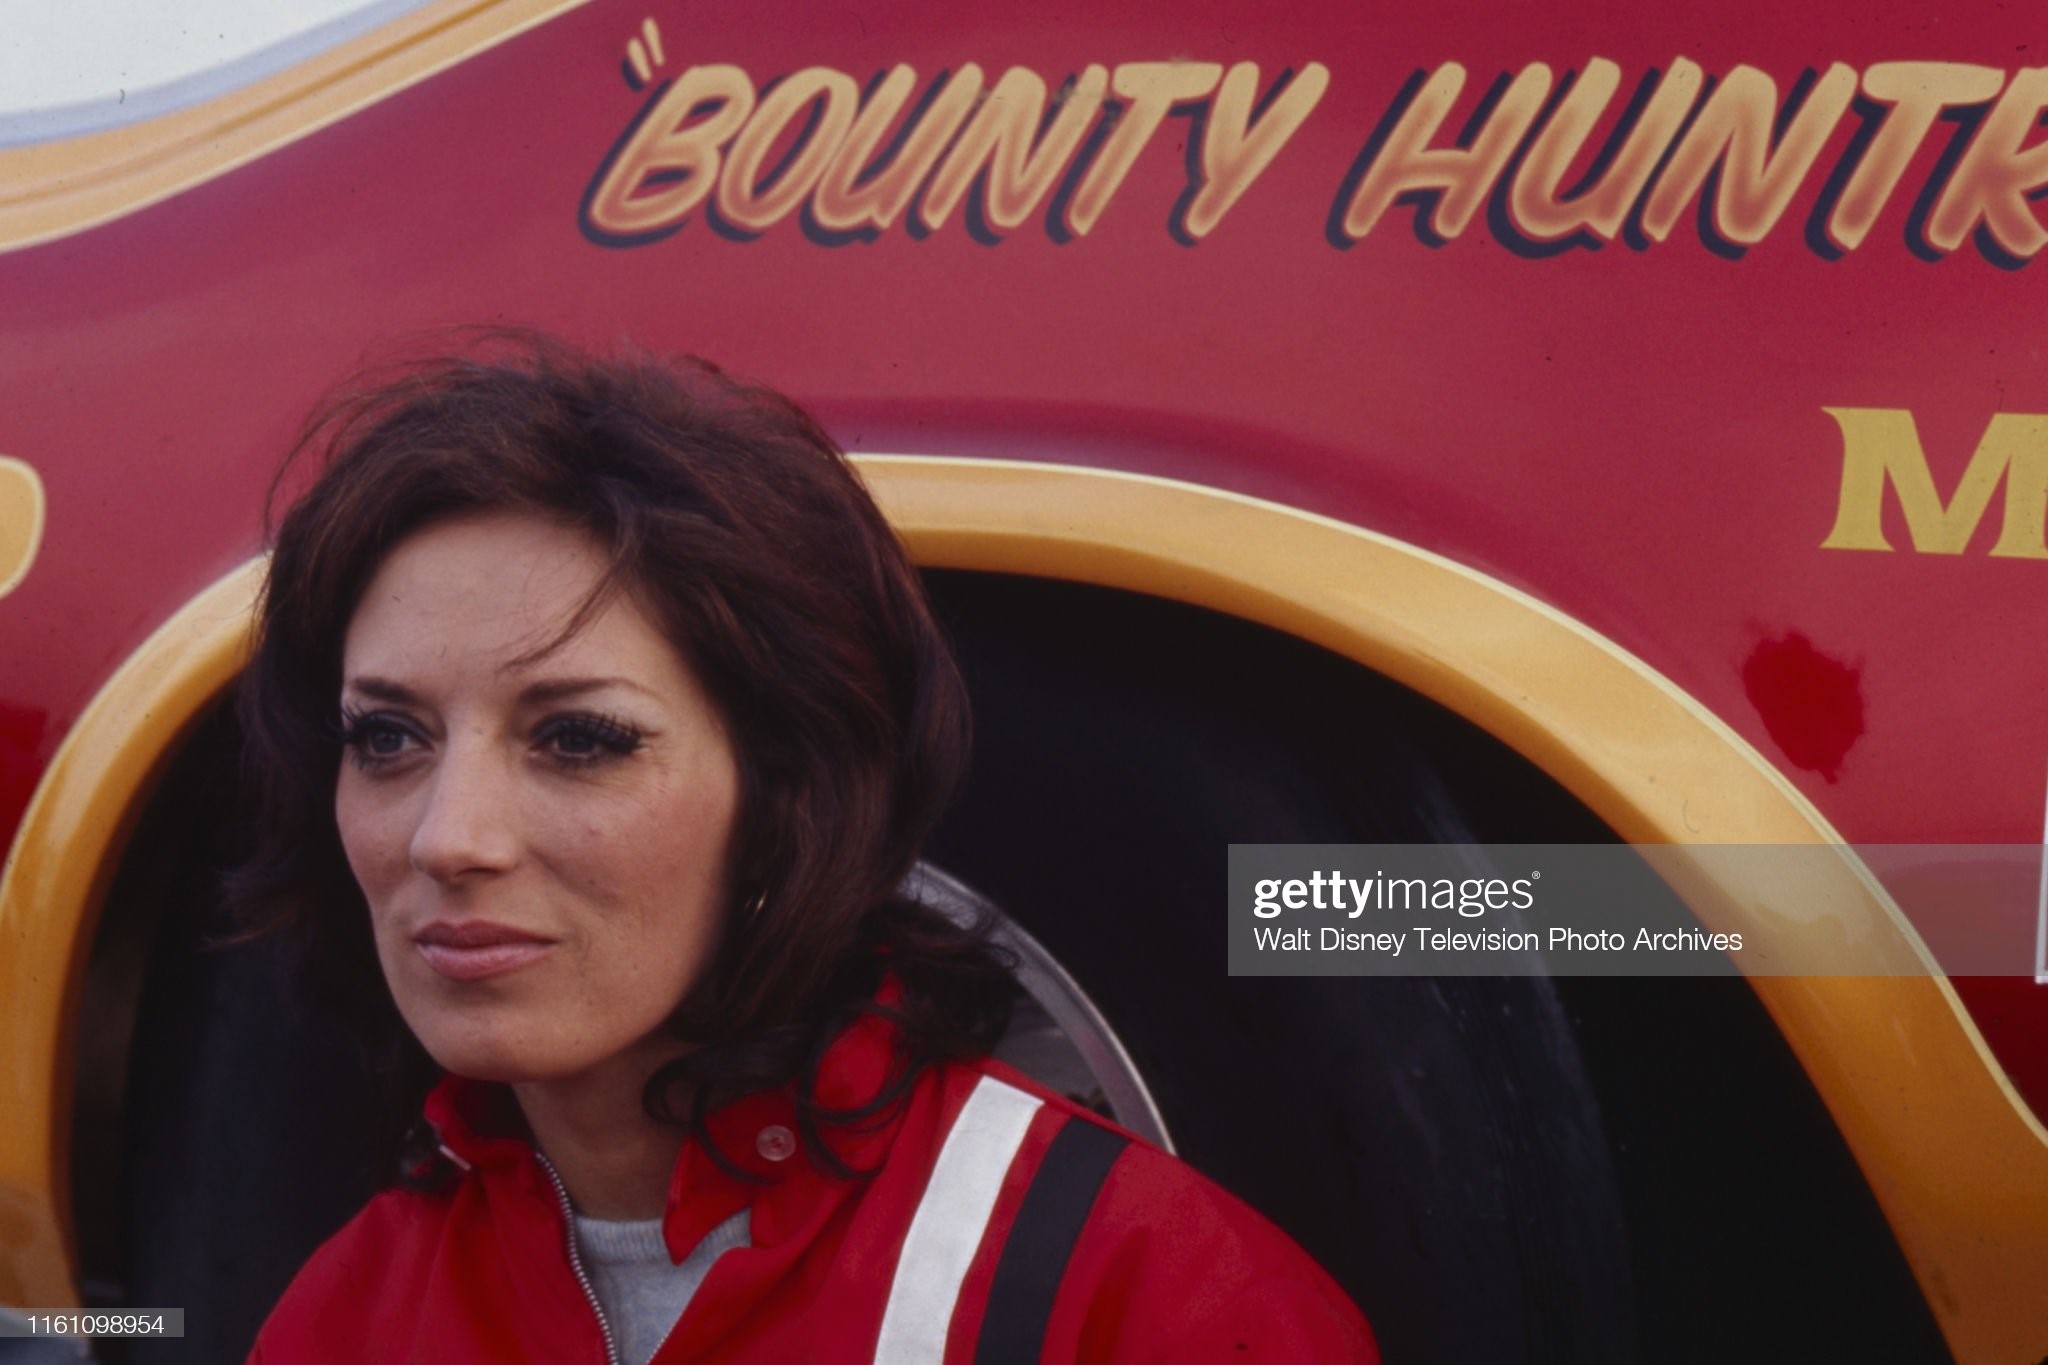 Shirley Muldowney competing in the National Hot Rod Association / NHRA's Winternationals at the Auto Club Raceway / Pomona Raceway, CA, on January 01, 1970.